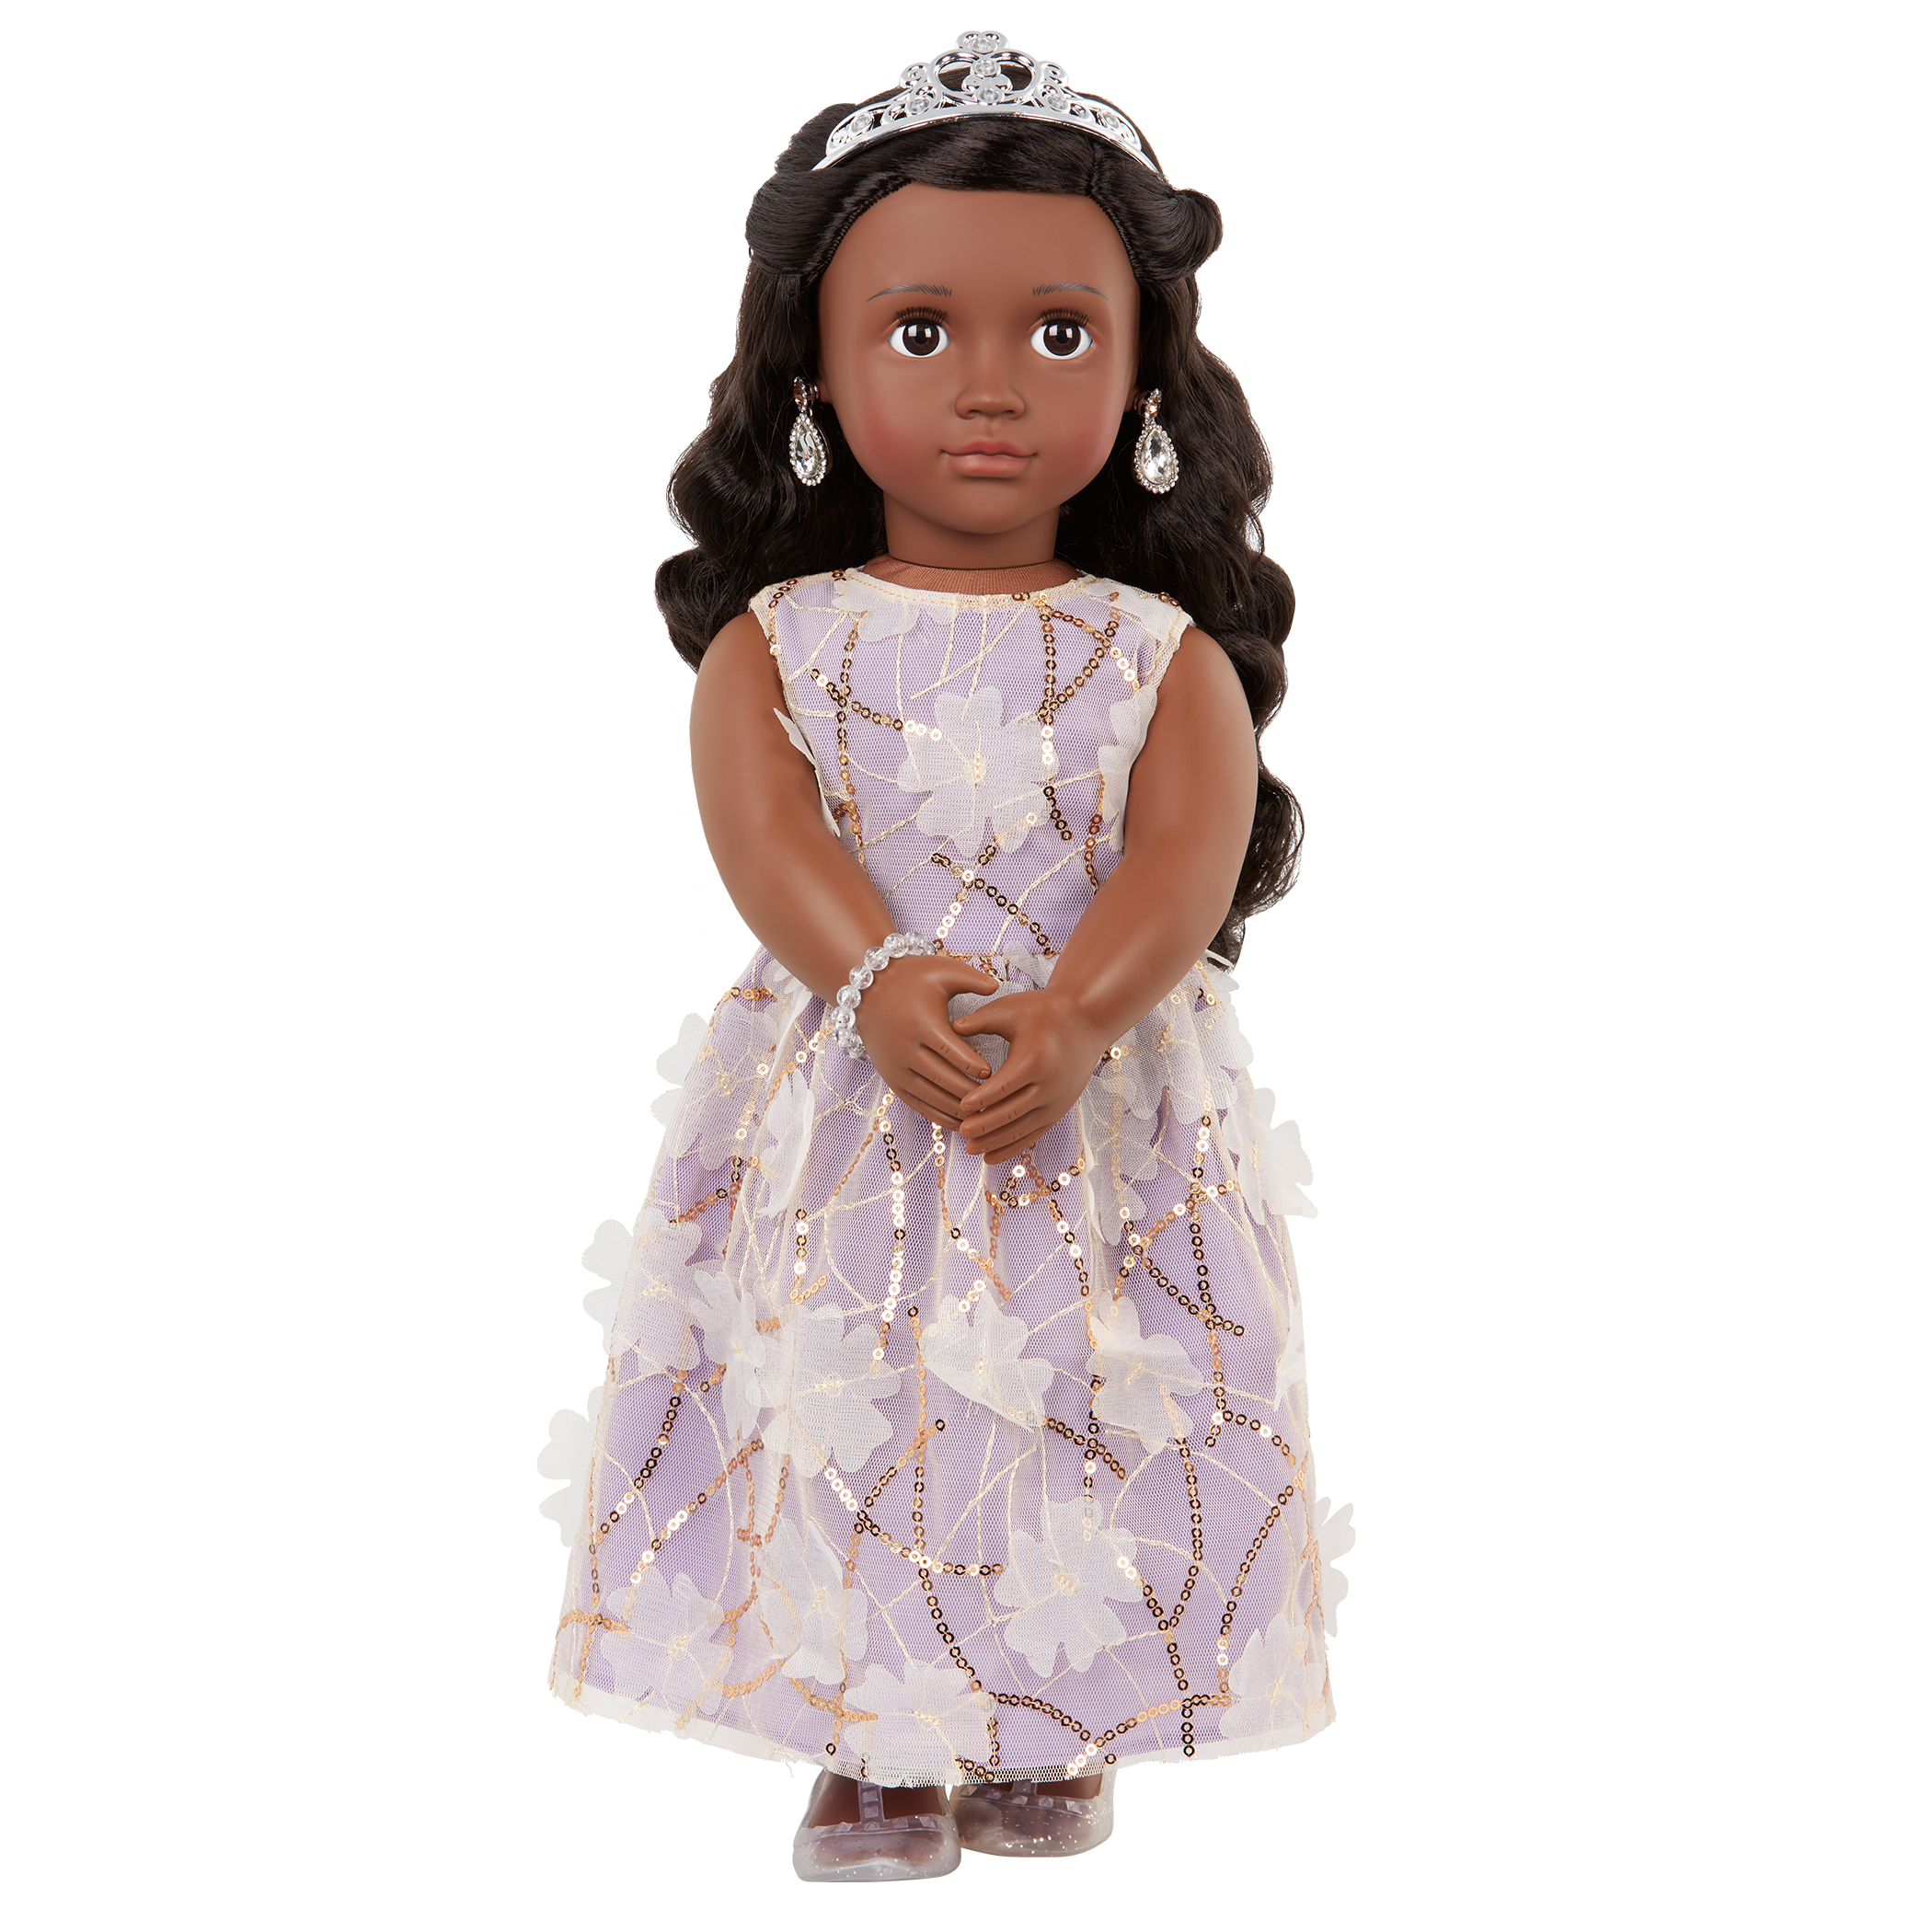 Our Generation 18-inch Special Event Doll Ambreal